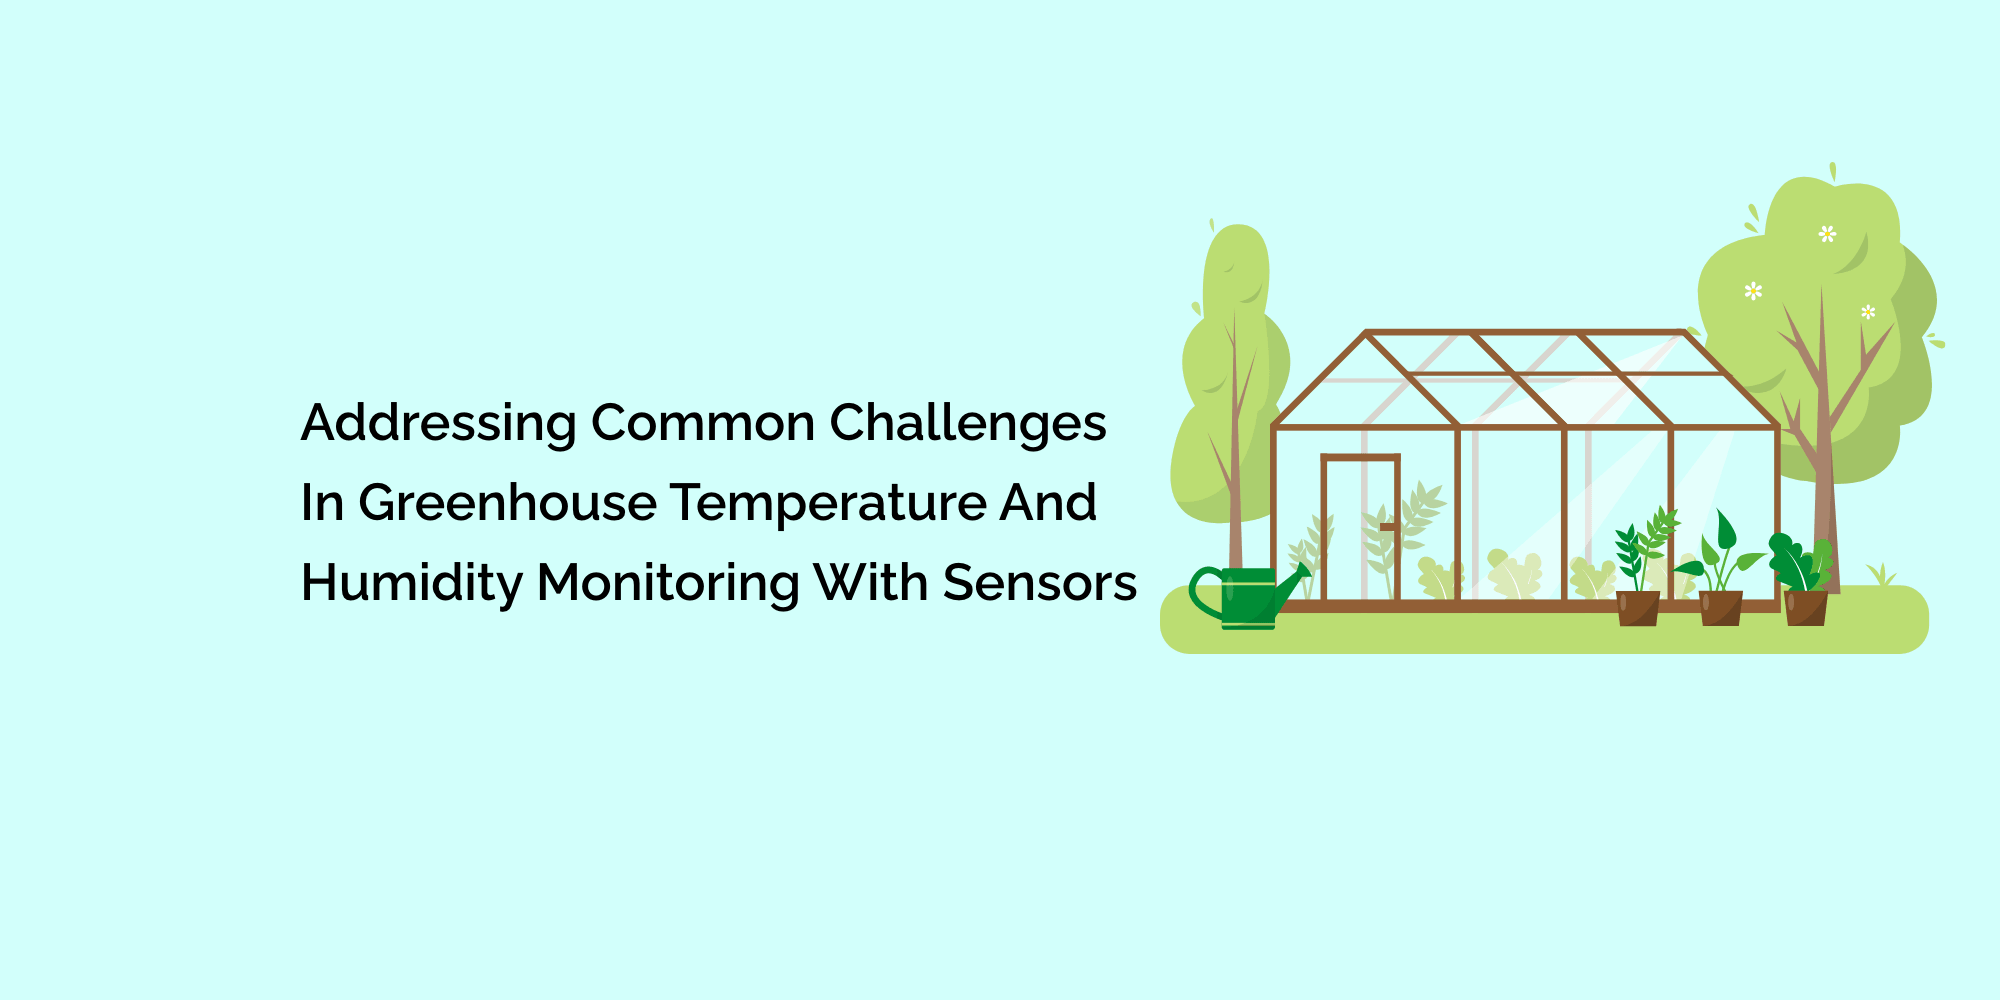 Addressing Common Challenges in Greenhouse Temperature and Humidity Monitoring with Sensors